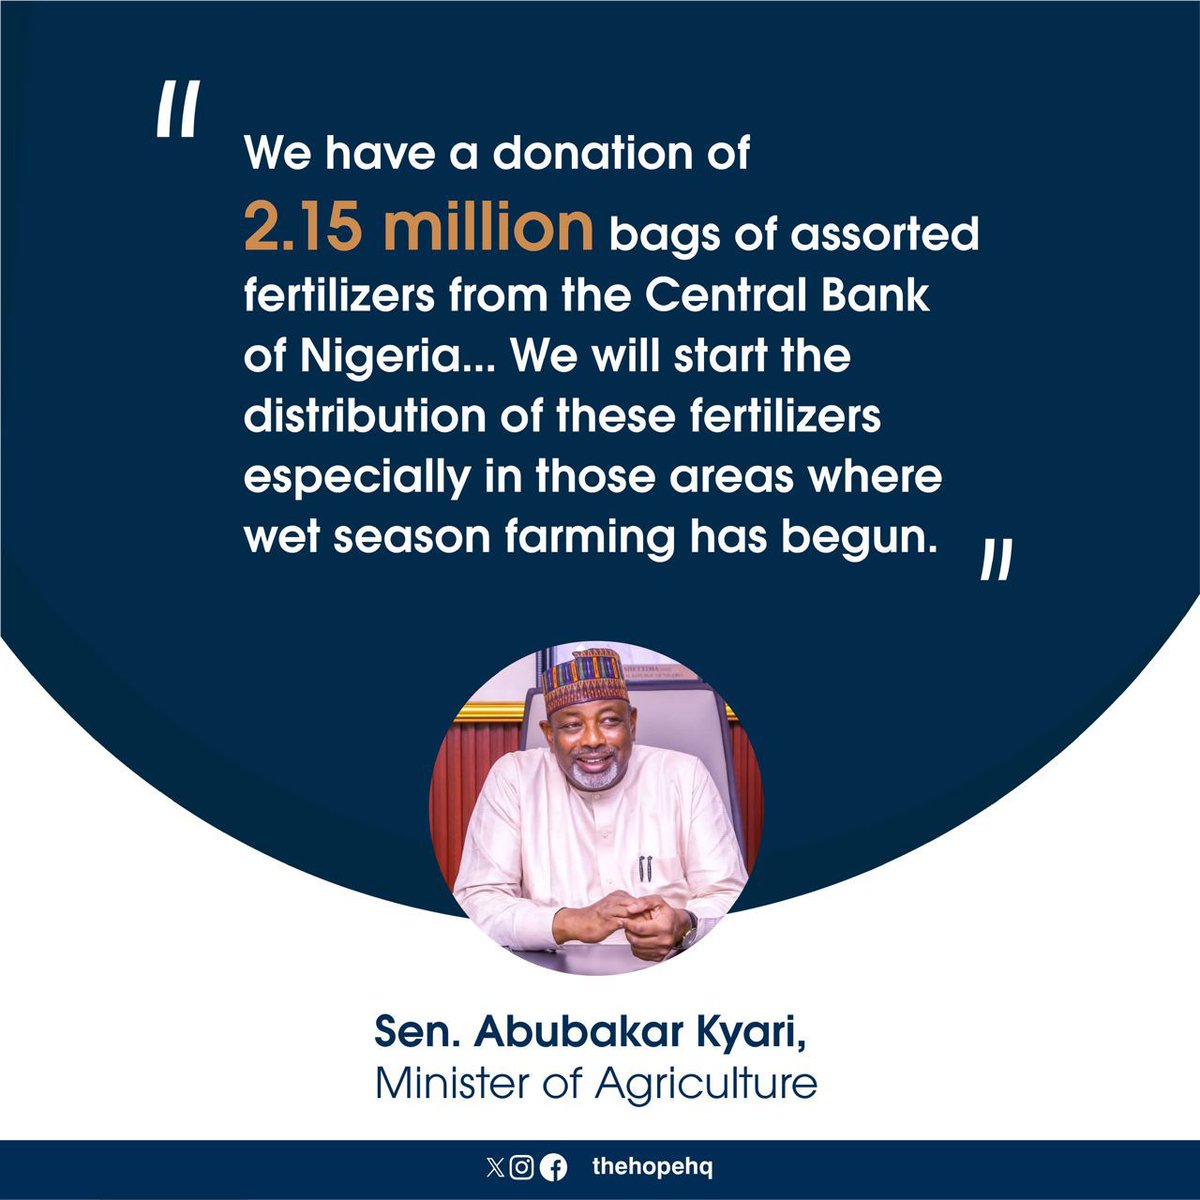 BREAKING: Federal government is set to begin the distribution of 2.15million bags of various blends of fertilizers donated earlier by the Central Bank of Nigeria for the ongoing wet season planting to farmers across the 36 states and FCT. In its pursuit of food sustainability